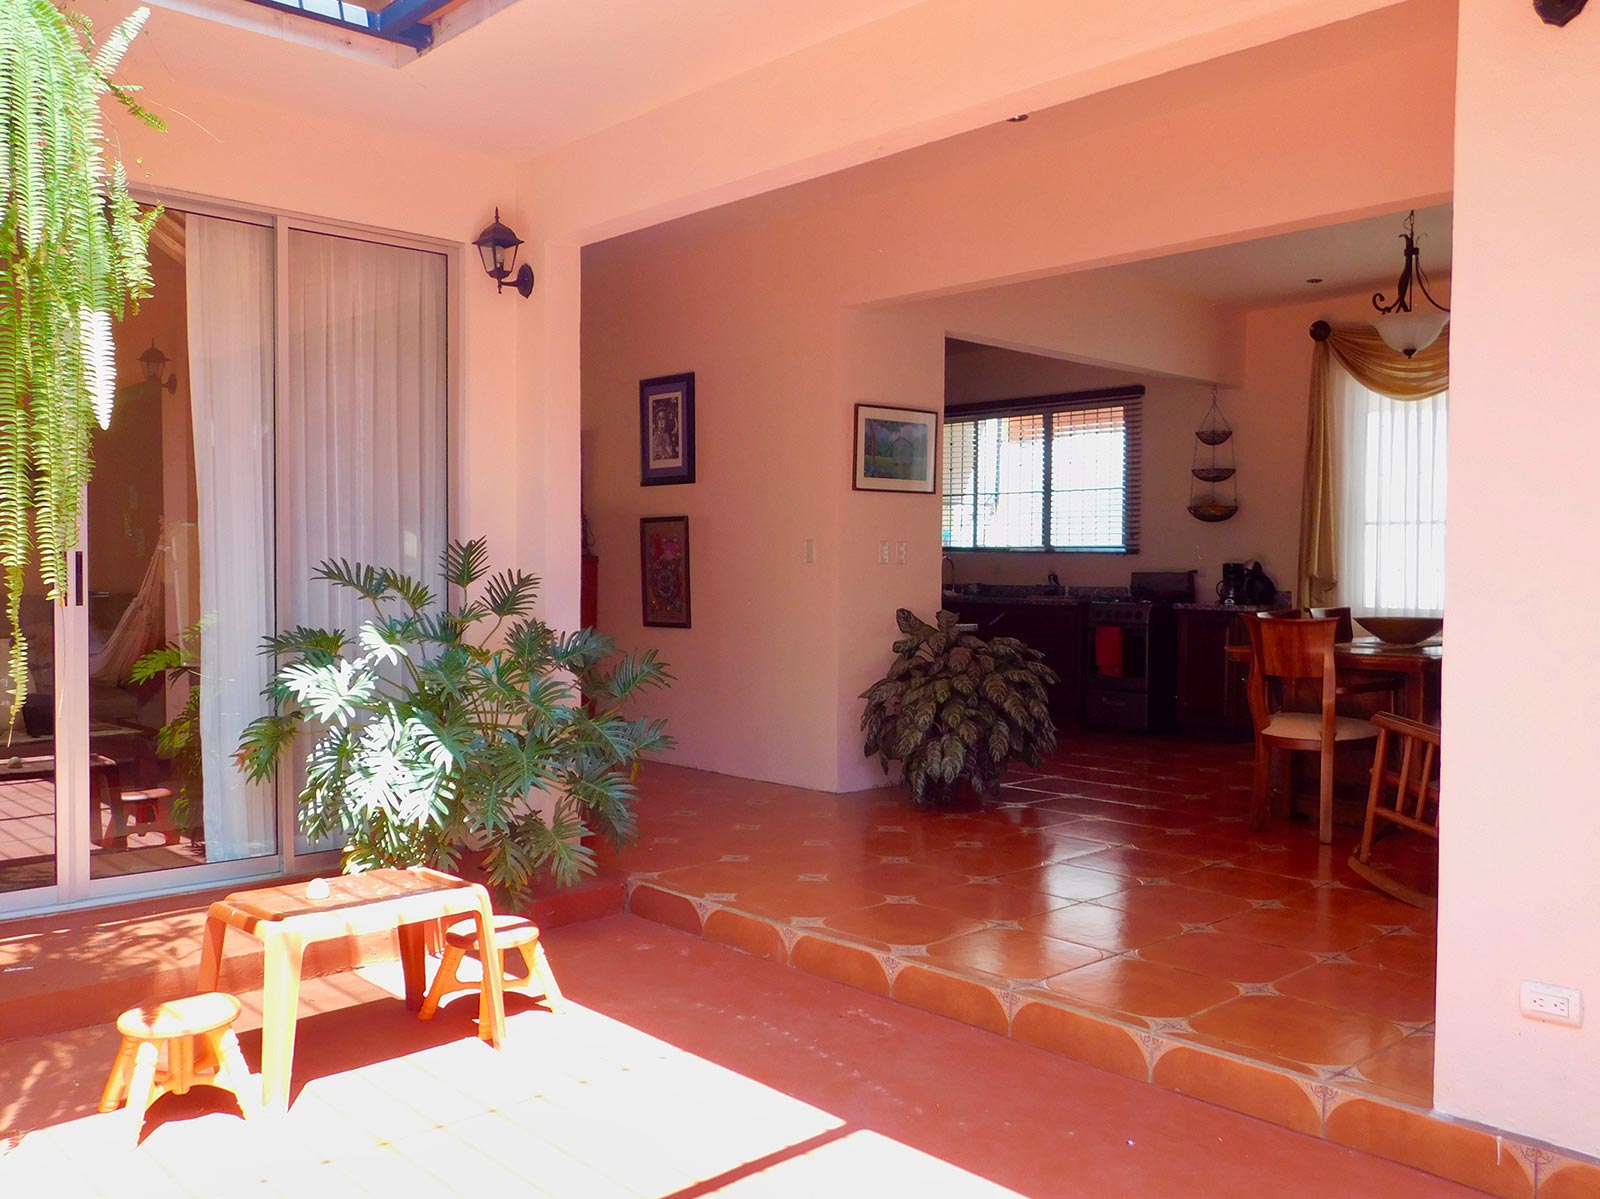  house for sale atenas